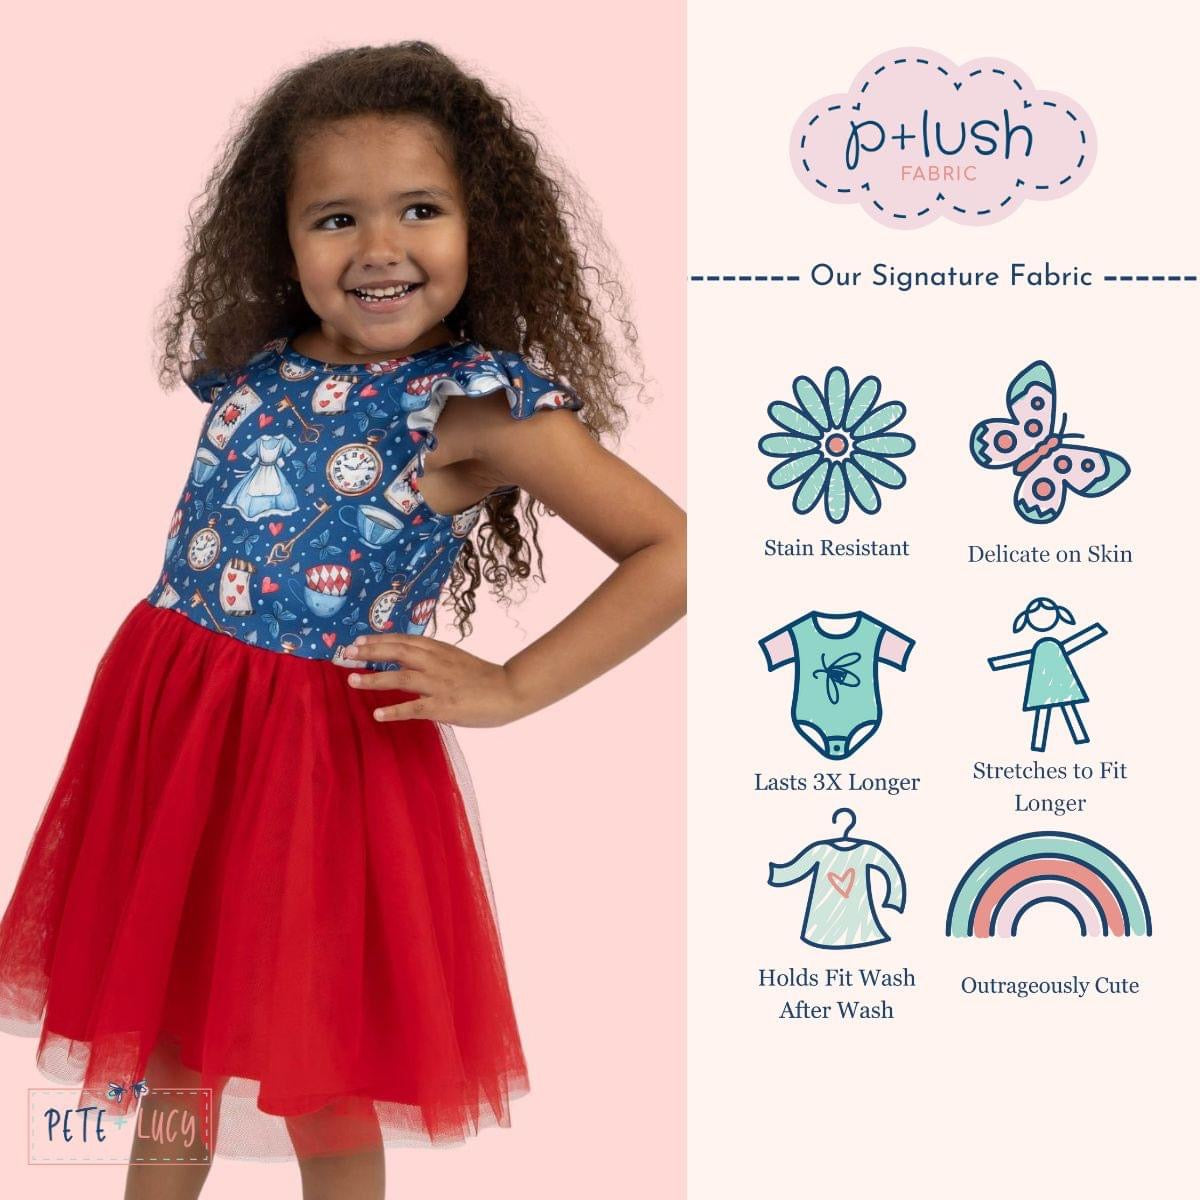 (Preorder) Wonderland Whimsies Tulle Dress by Pete + Lucy